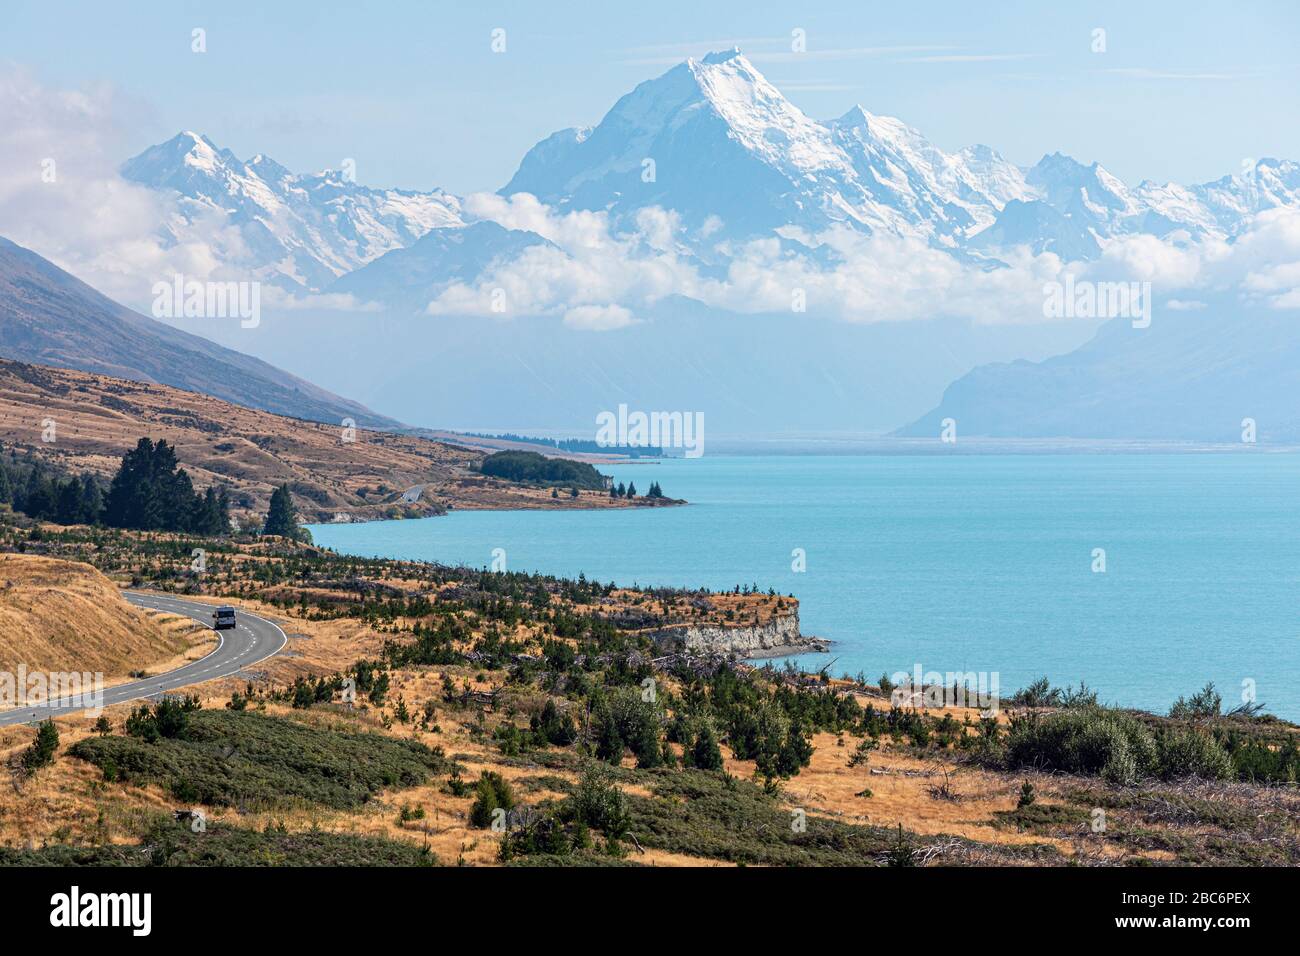 The road beside Lake Pukaki leading to the Mount Cook National Park, South Island, New Zealand Stock Photo